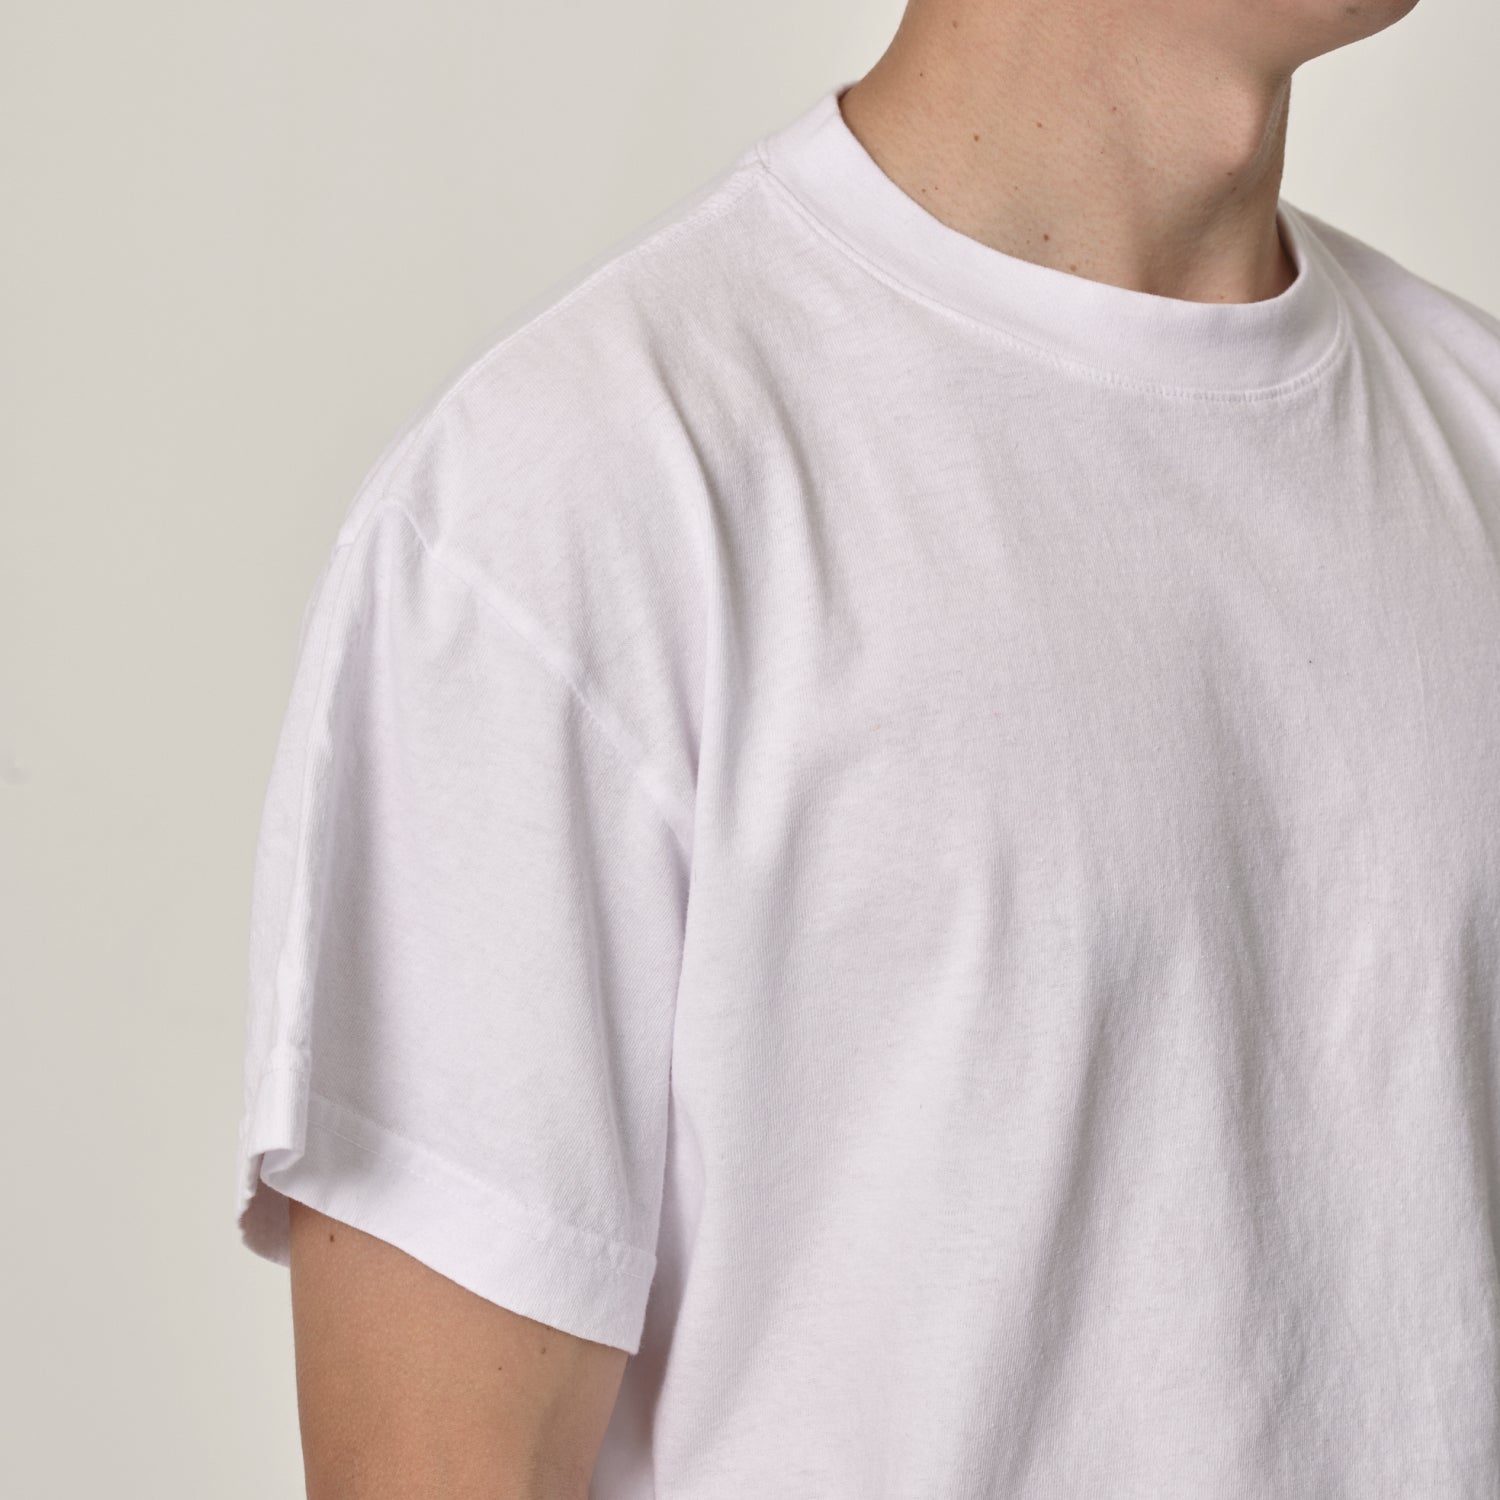 A person wearing a white Trash Tee showing the details of the sleeve and collar.